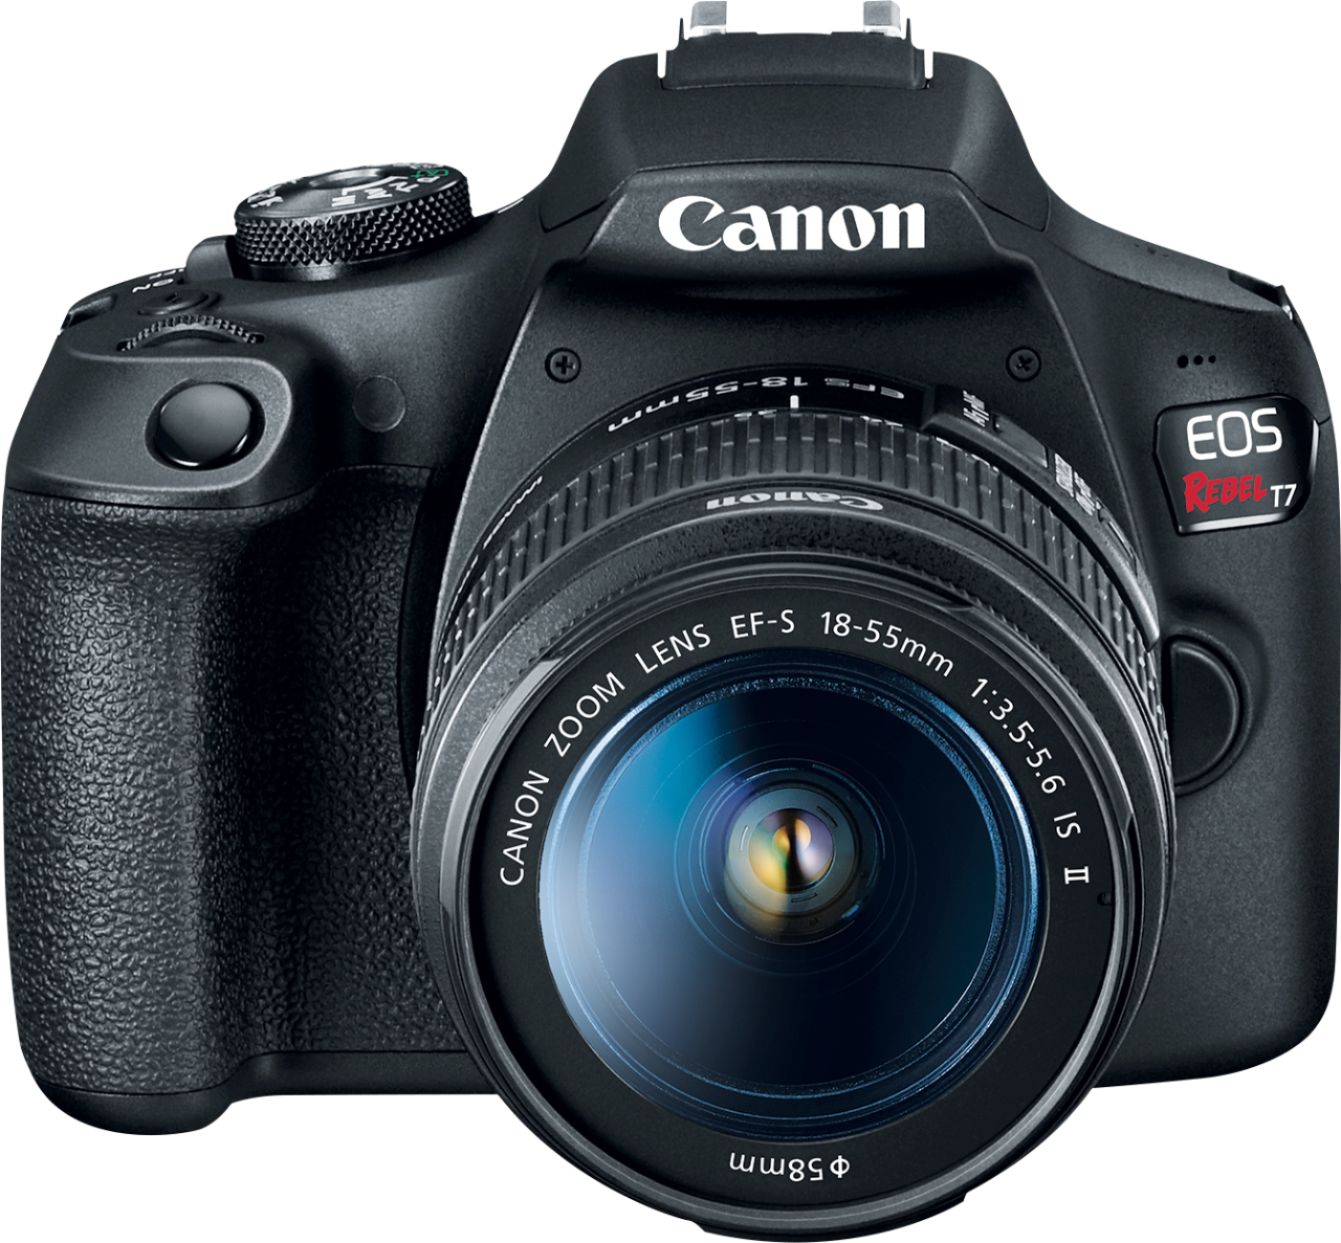 Canon EOS Rebel T7 DSLR Video Two Lens Kit with EF-S 18-55mm and